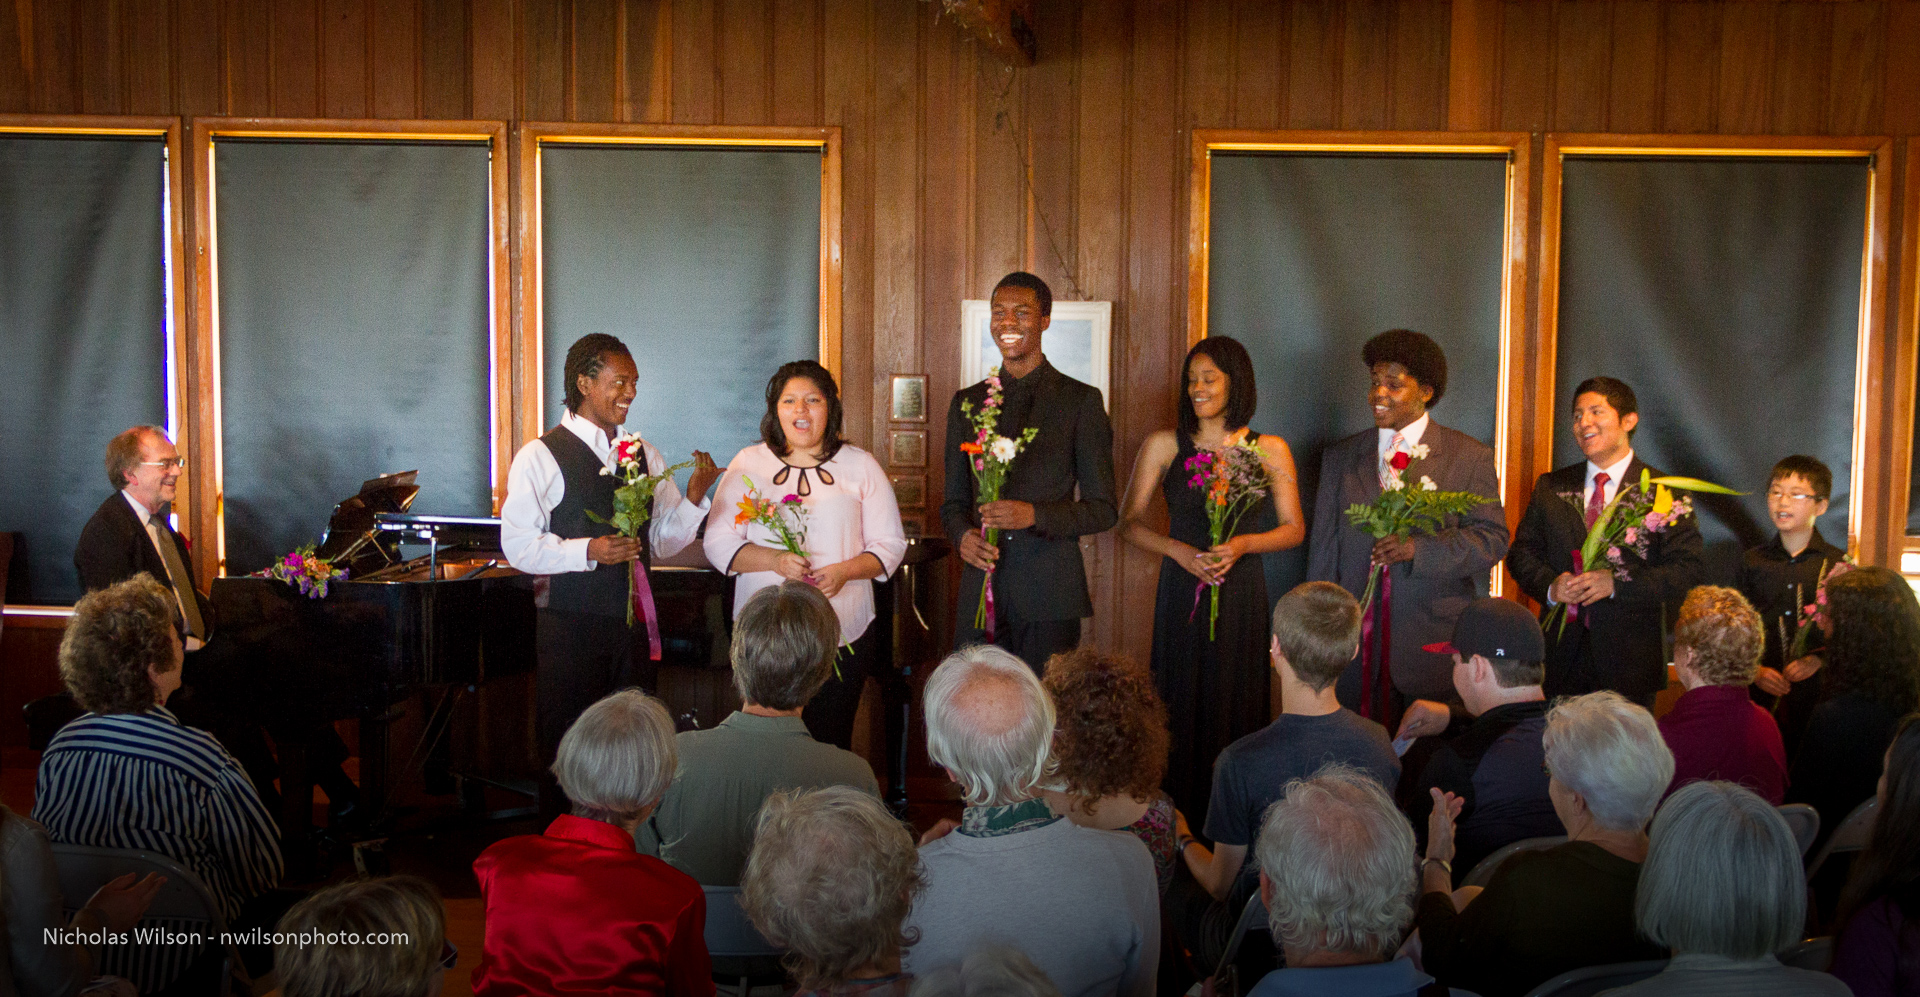 YMCO singers with bouquets